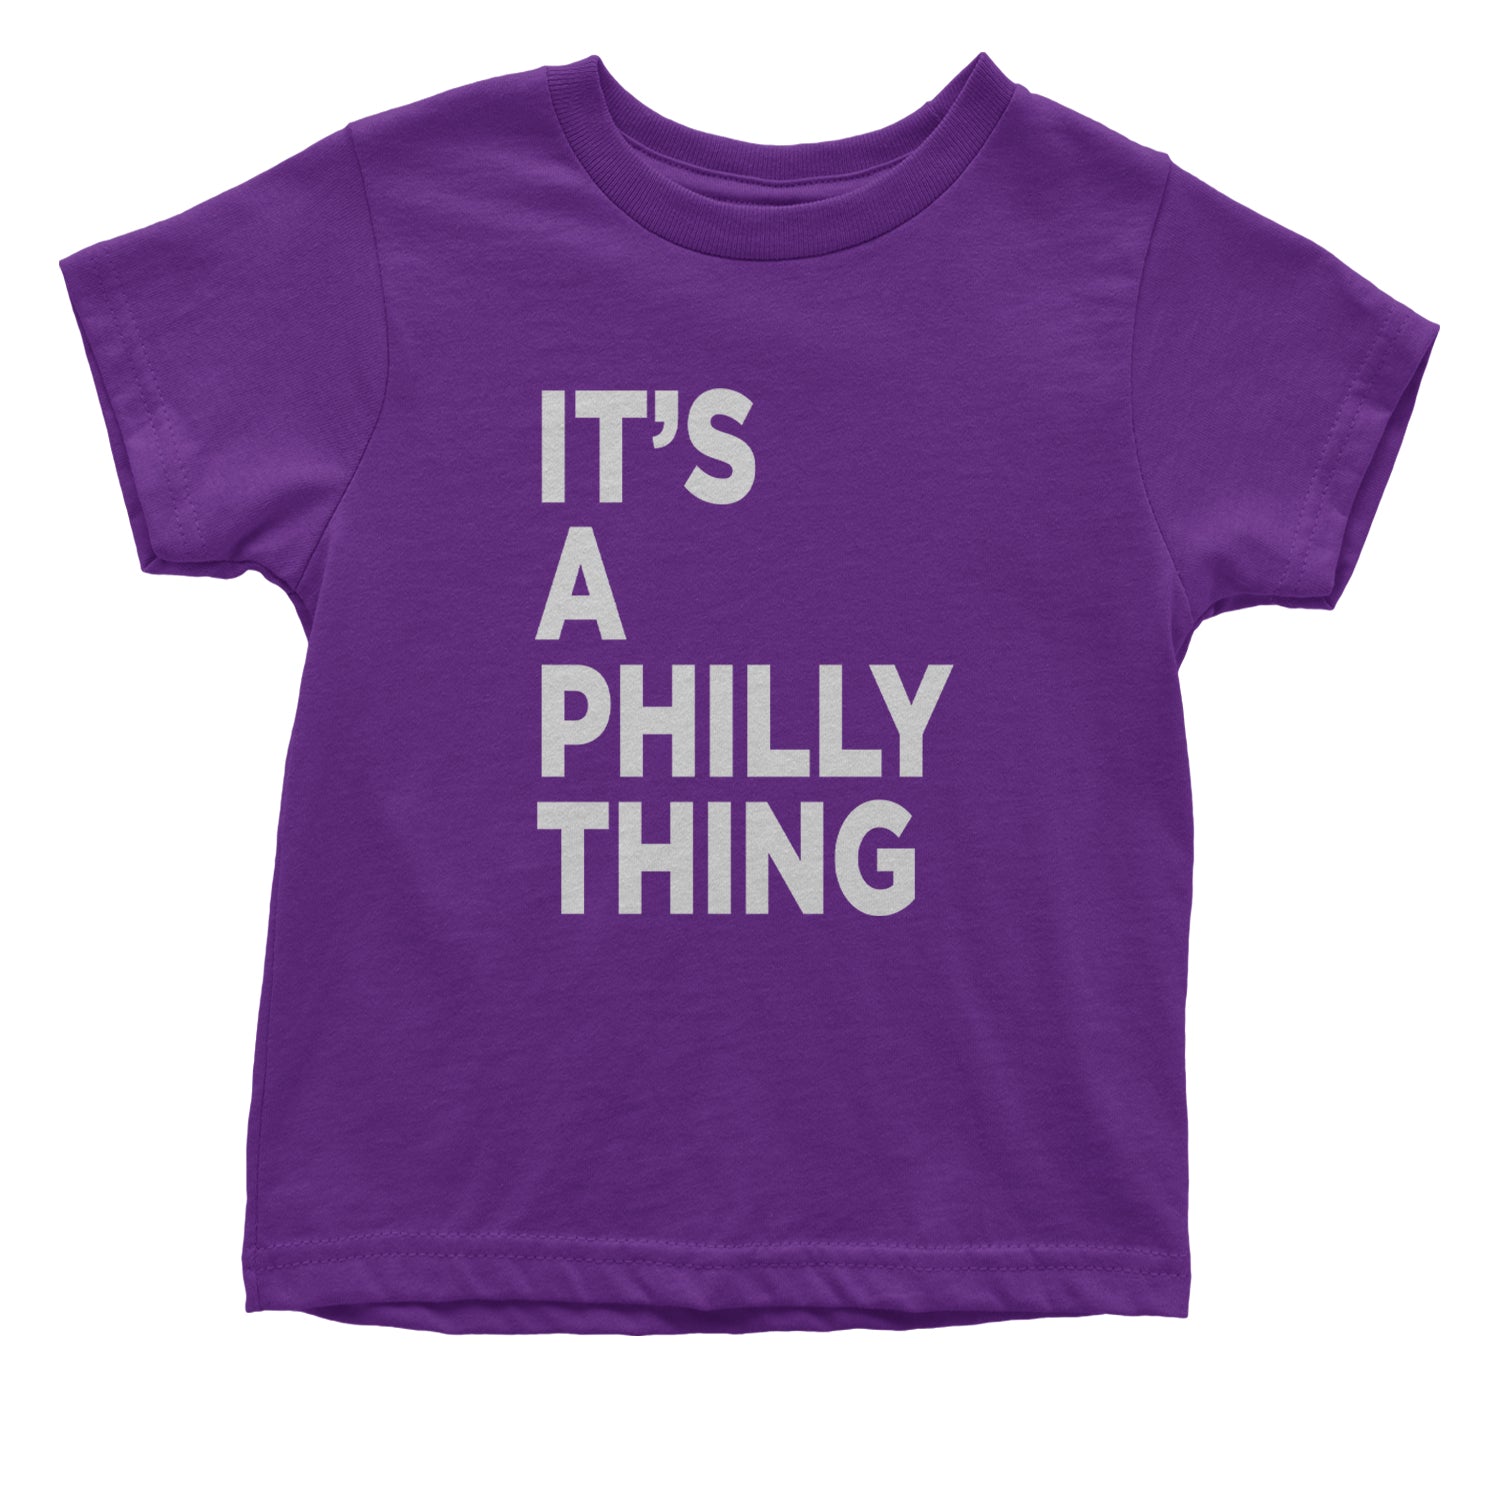 PHILLY It's A Philly Thing Infant One-Piece Romper Bodysuit and Toddler T-shirt baseball, dilly, filly, football, jawn, morgan, Philadelphia, philli by Expression Tees